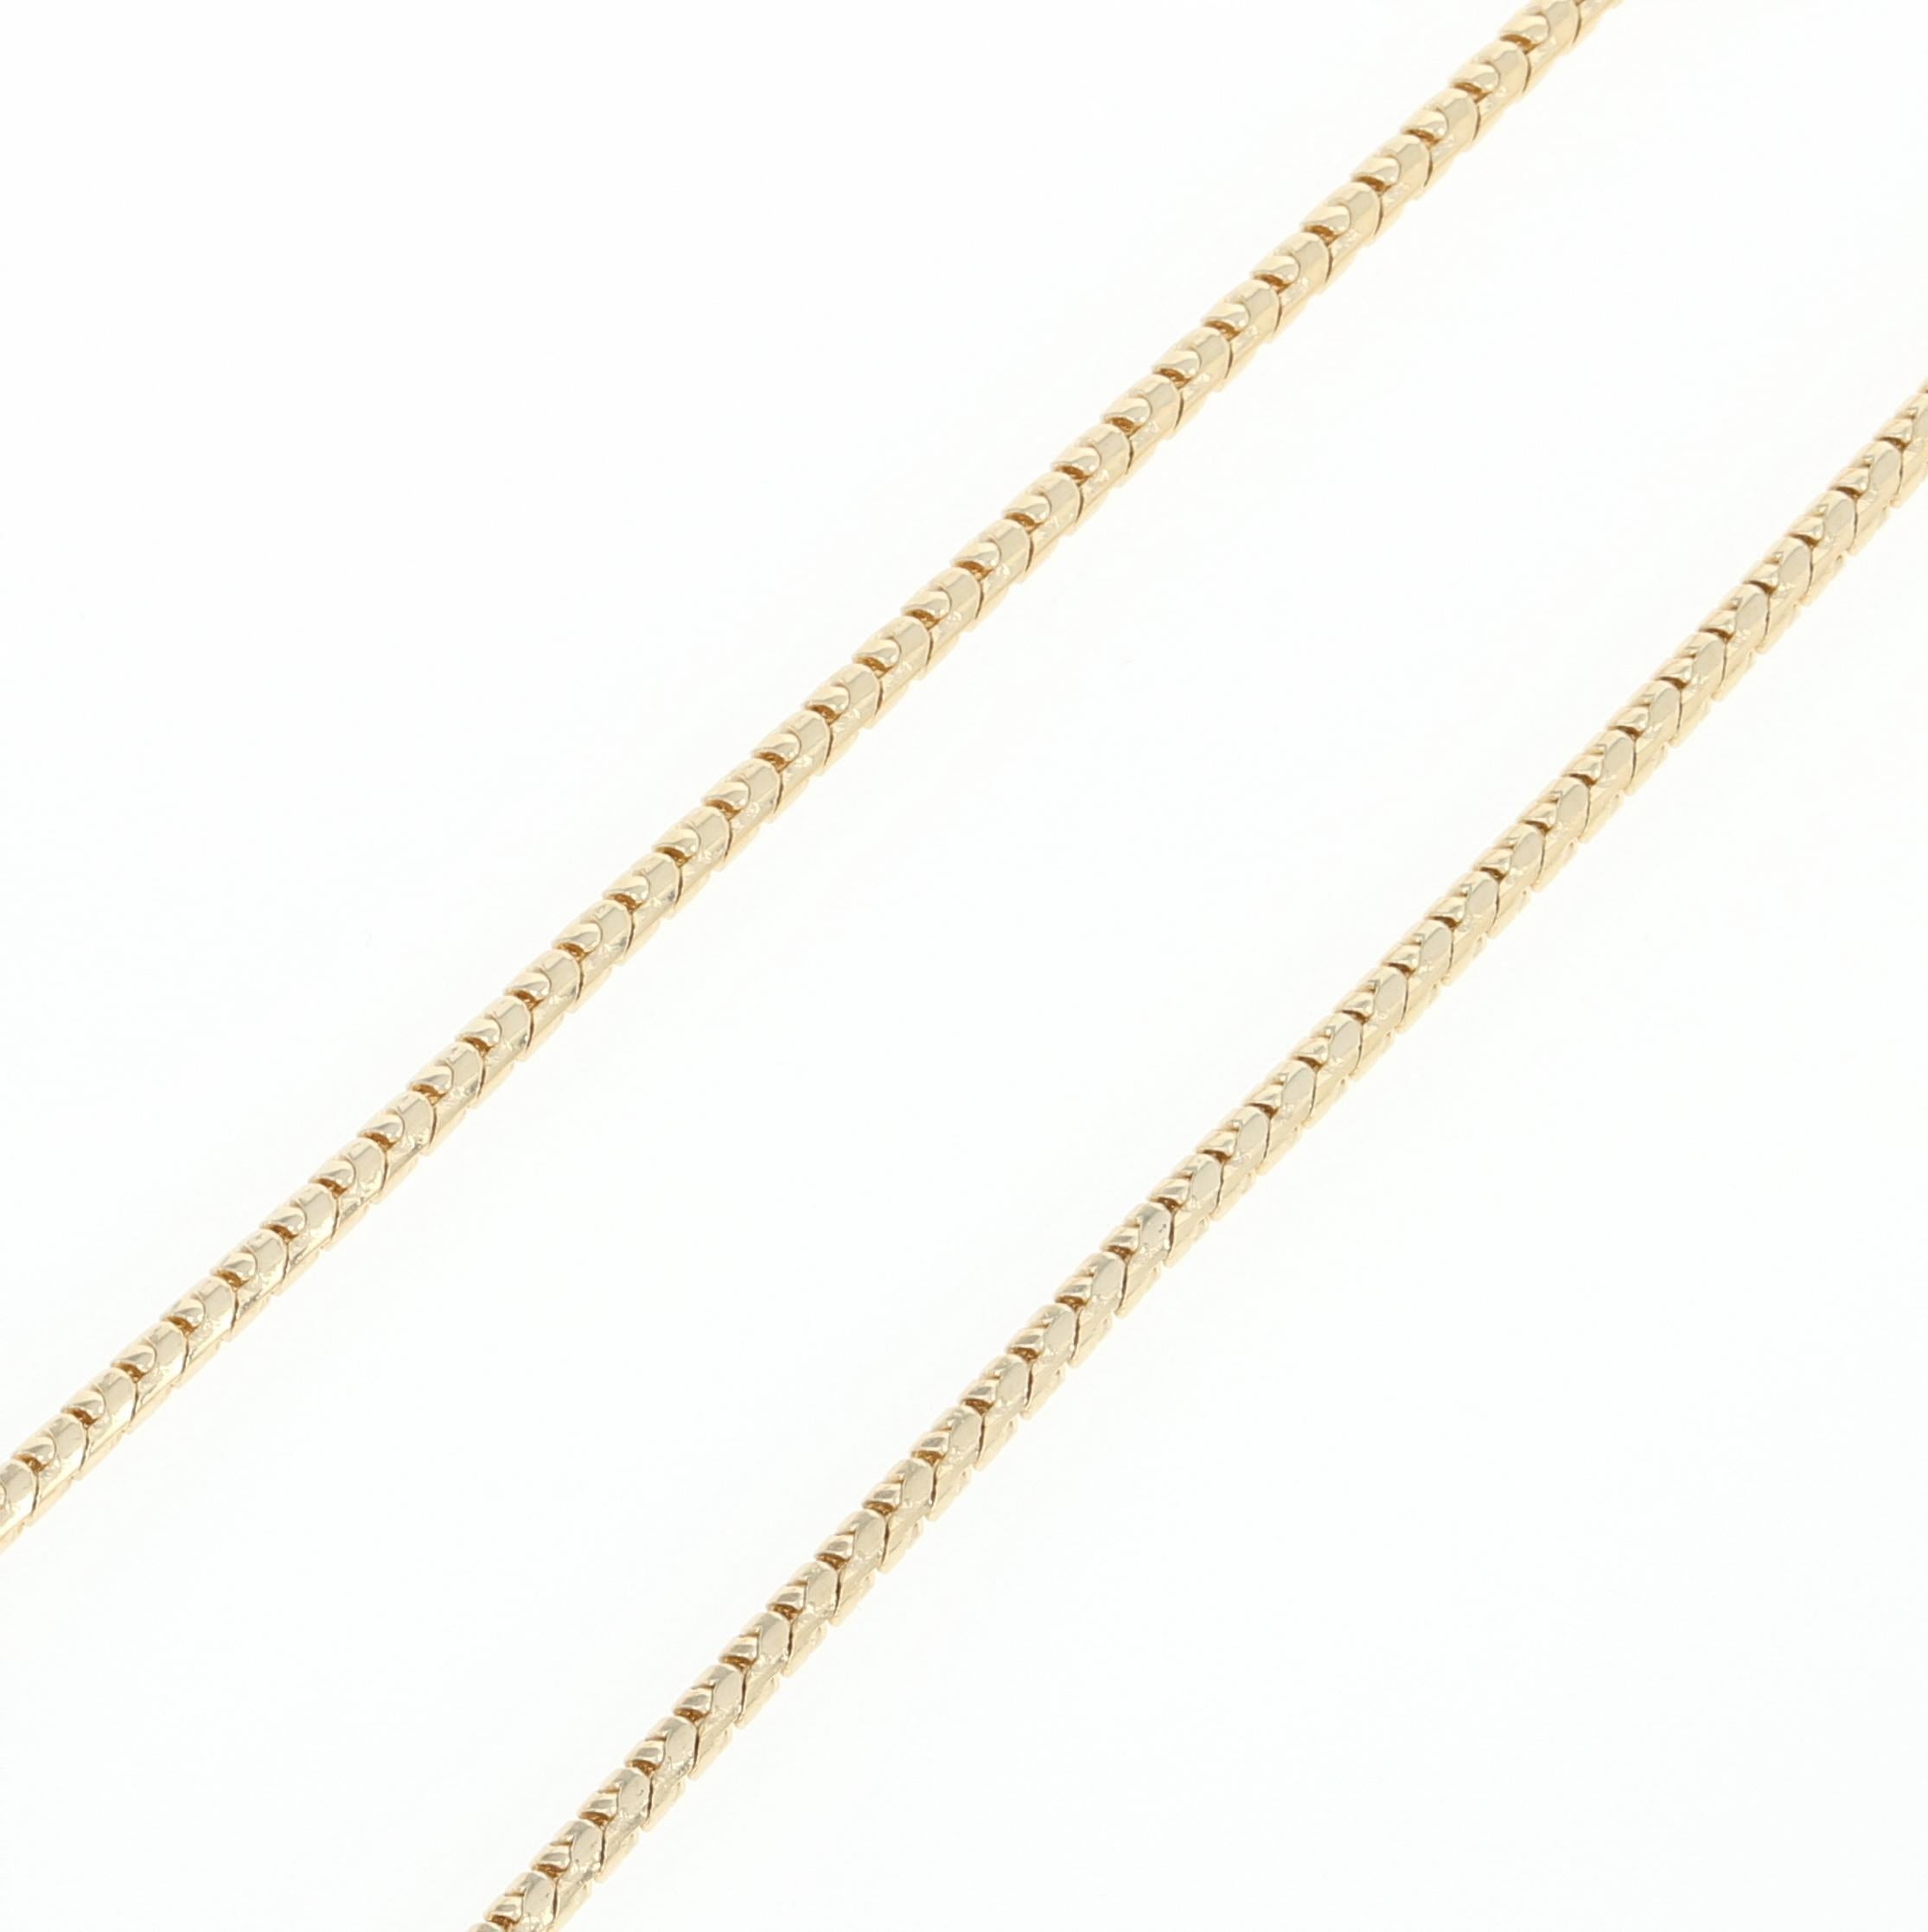 Crafted in 14k yellow gold, this versatile necklace is fashioned in a fancy snake chain style that will look stunning worn solo or matched with other chain necklaces for a chic, layered style! 

Metal Content: Guaranteed 14k Gold as stamped
Chain: